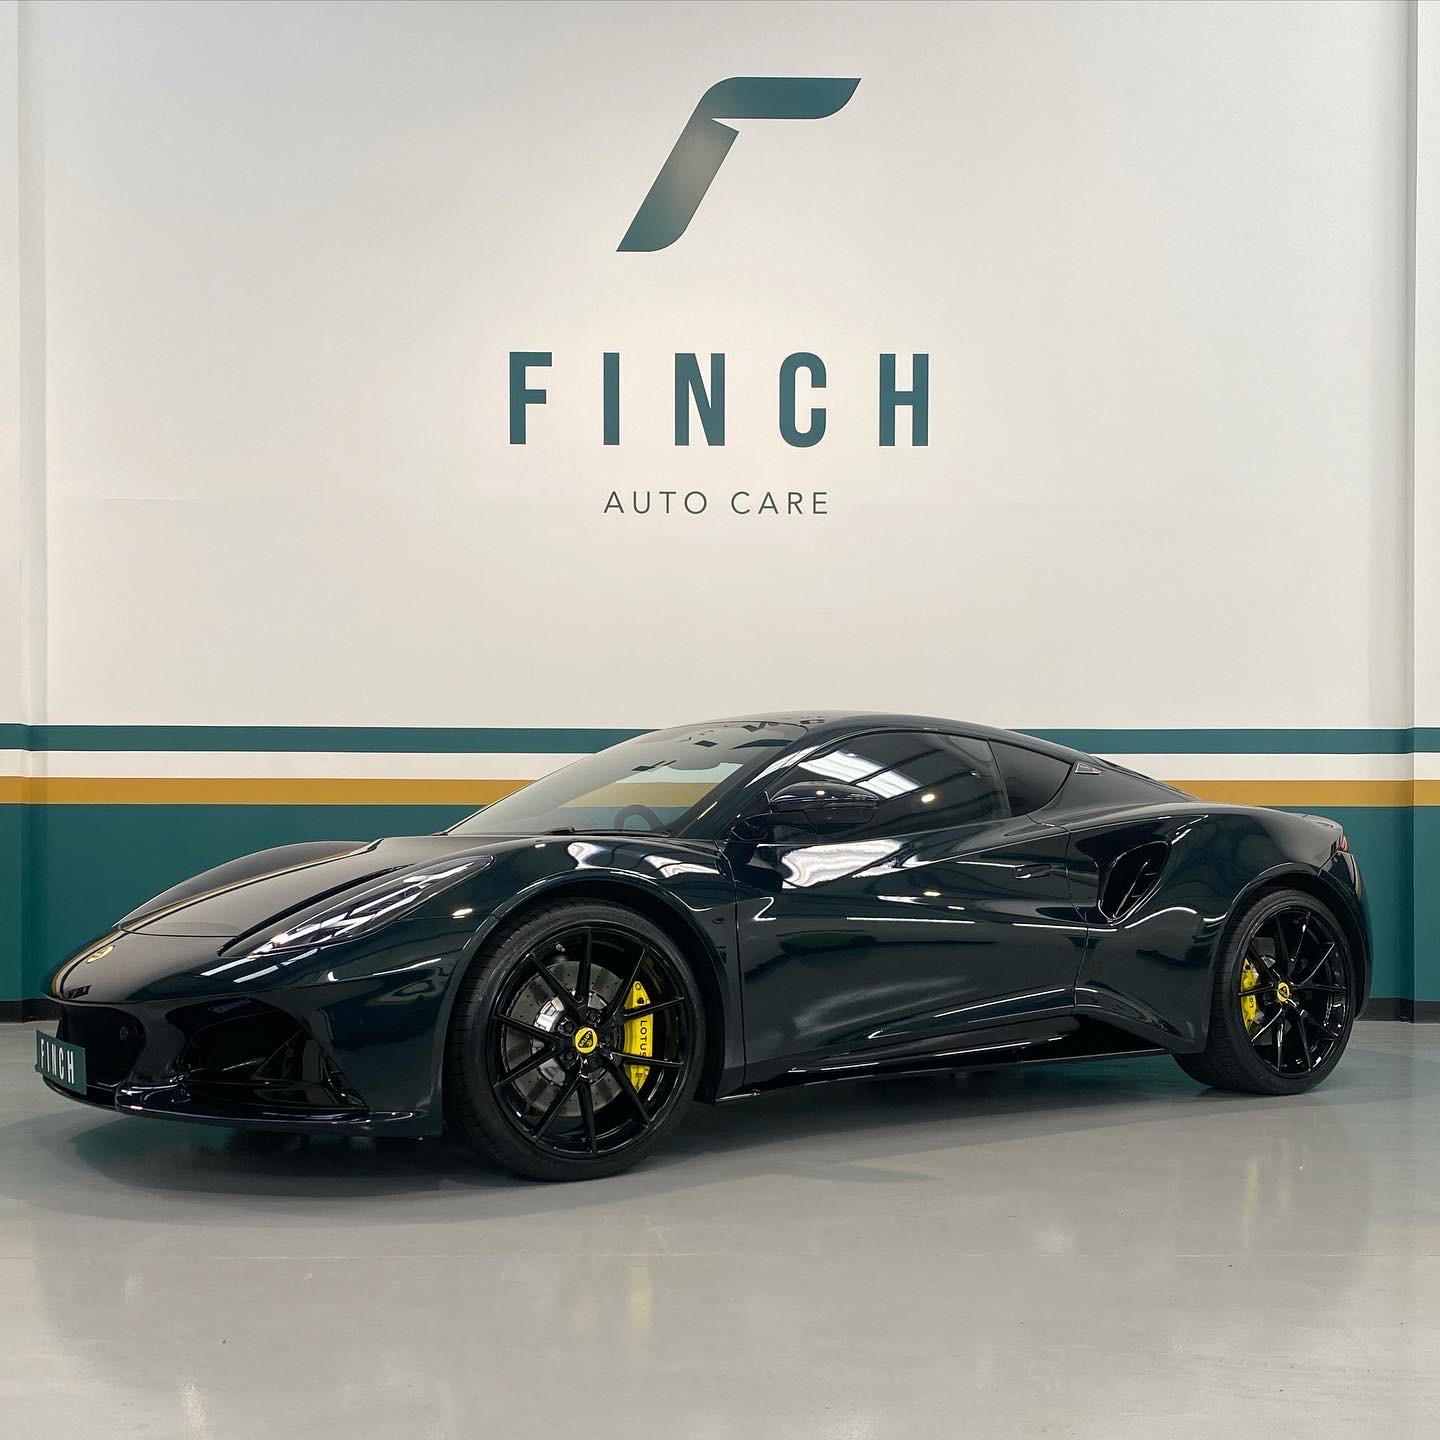 A black sports car parked in front of the finch auto care sign.